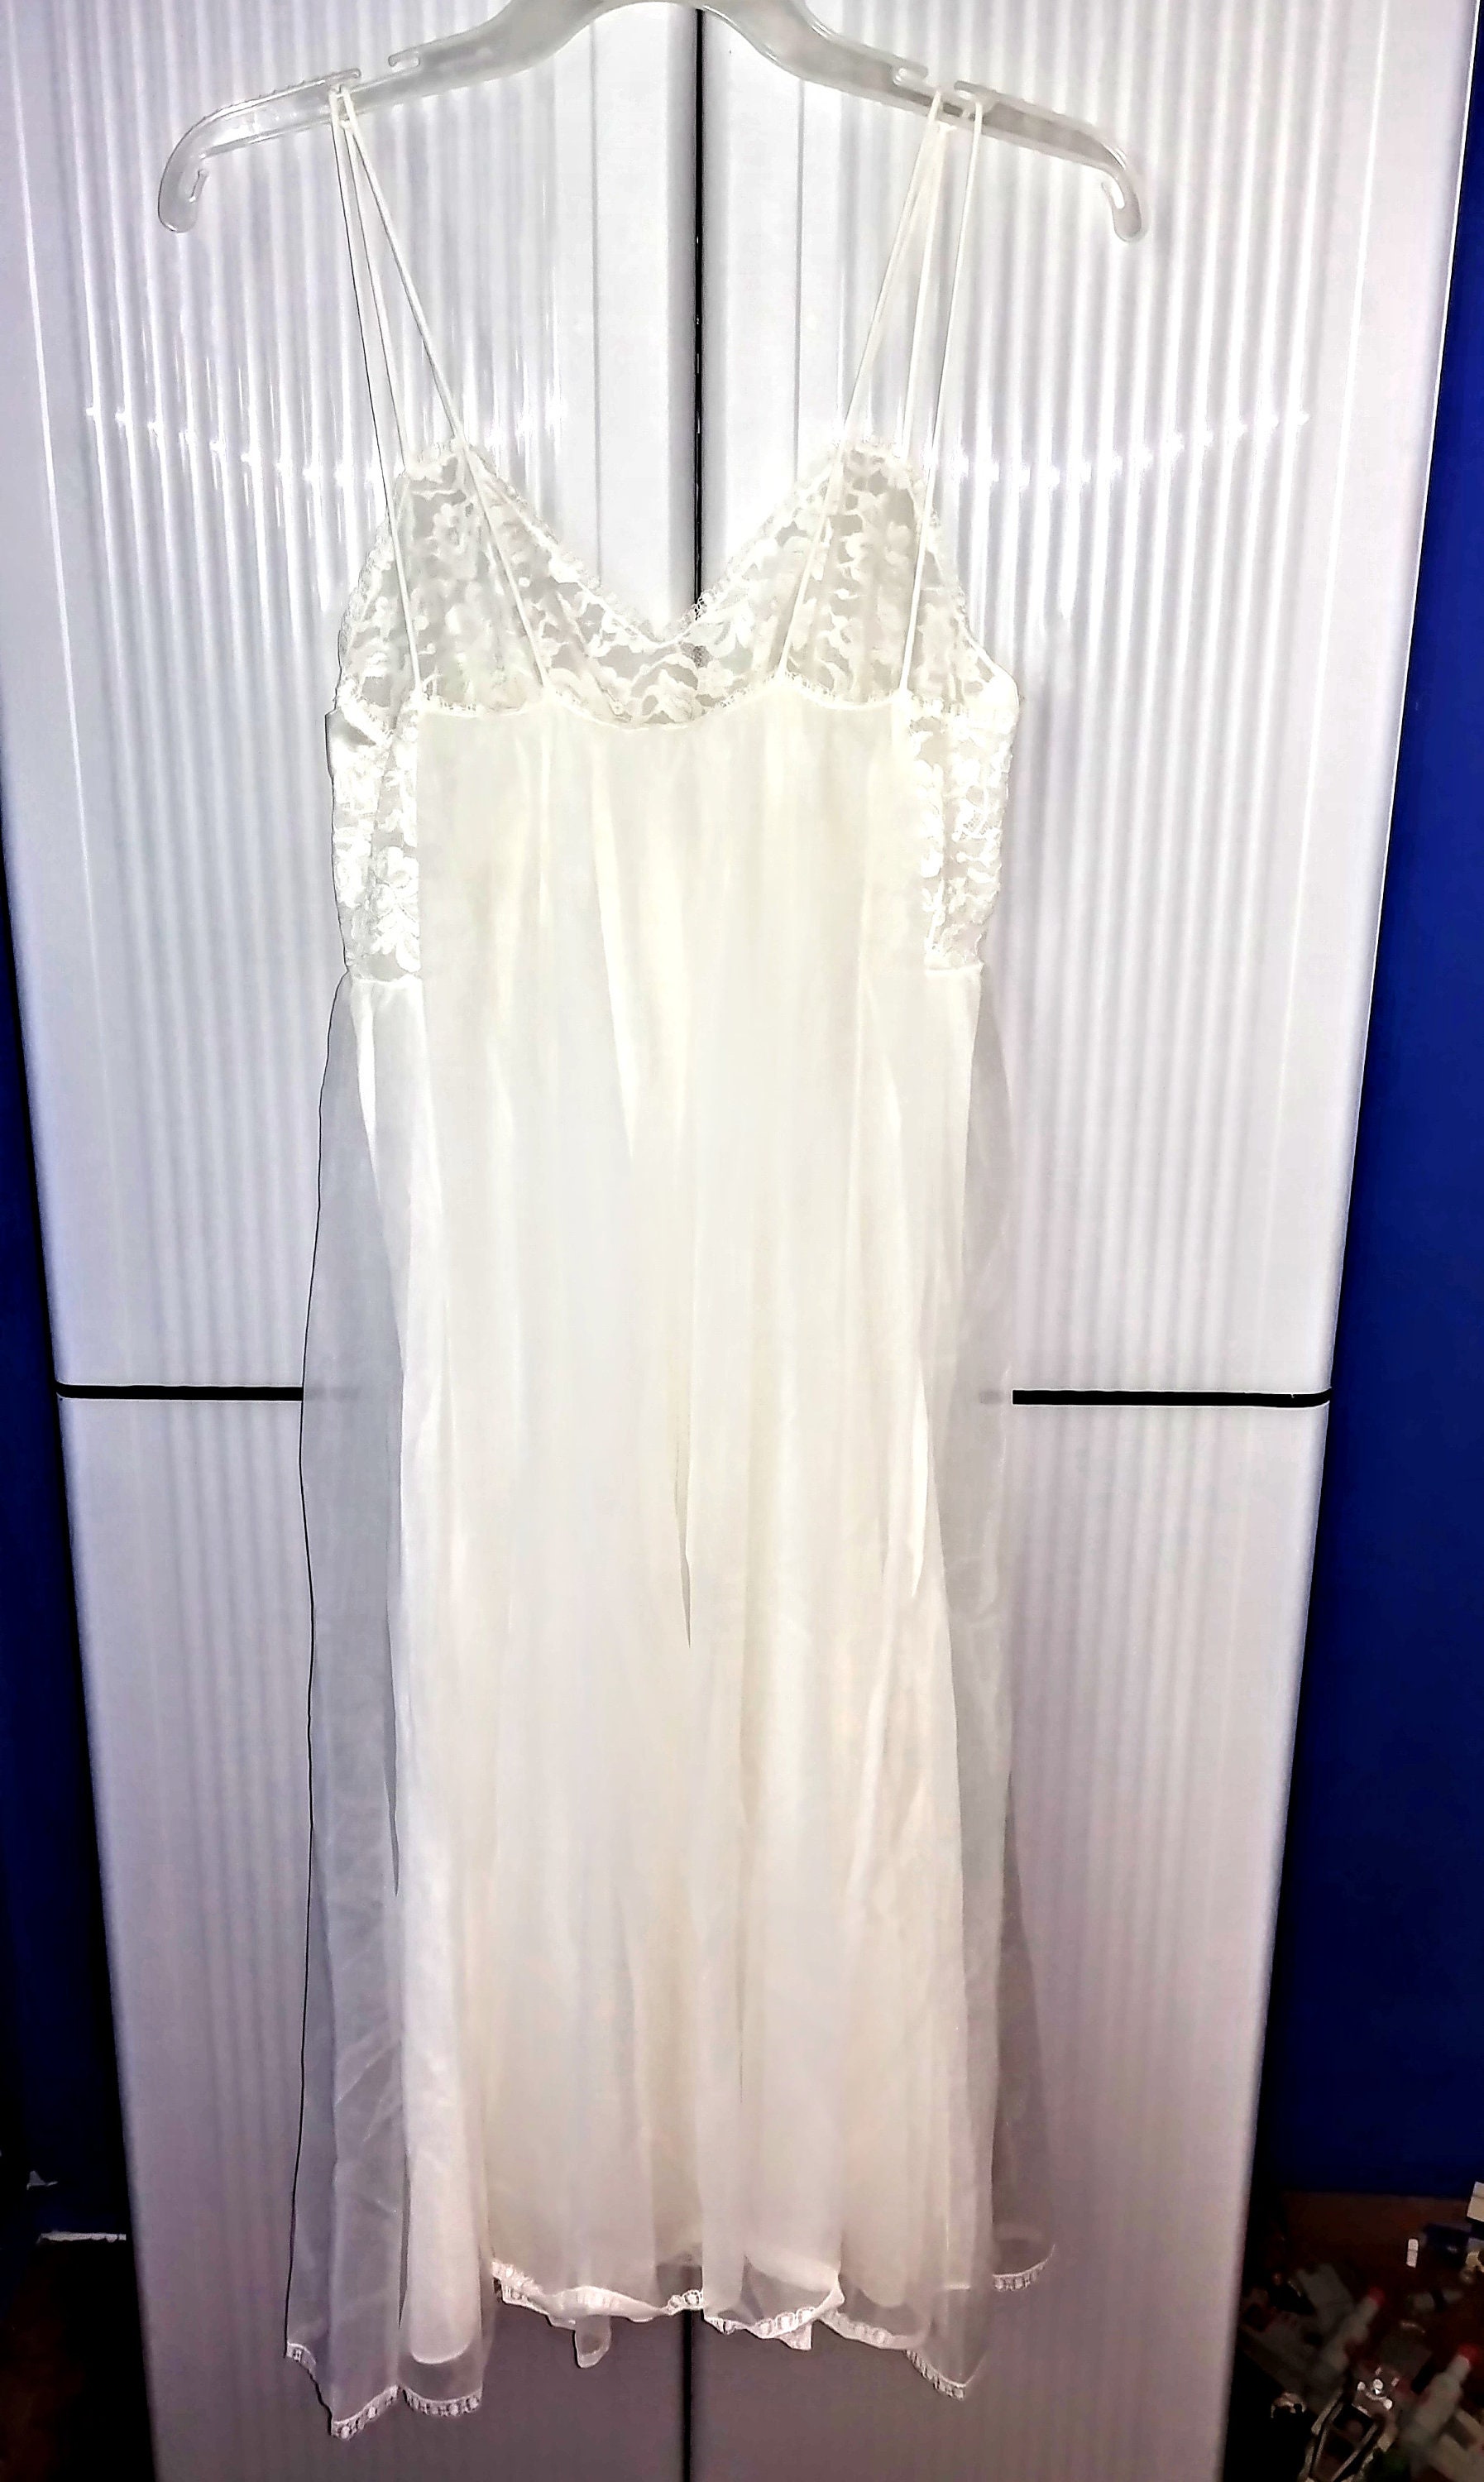 Vanity Fair Nightgown Lingerie Ivory Lacy Top Spaghetti Straps | Etsy